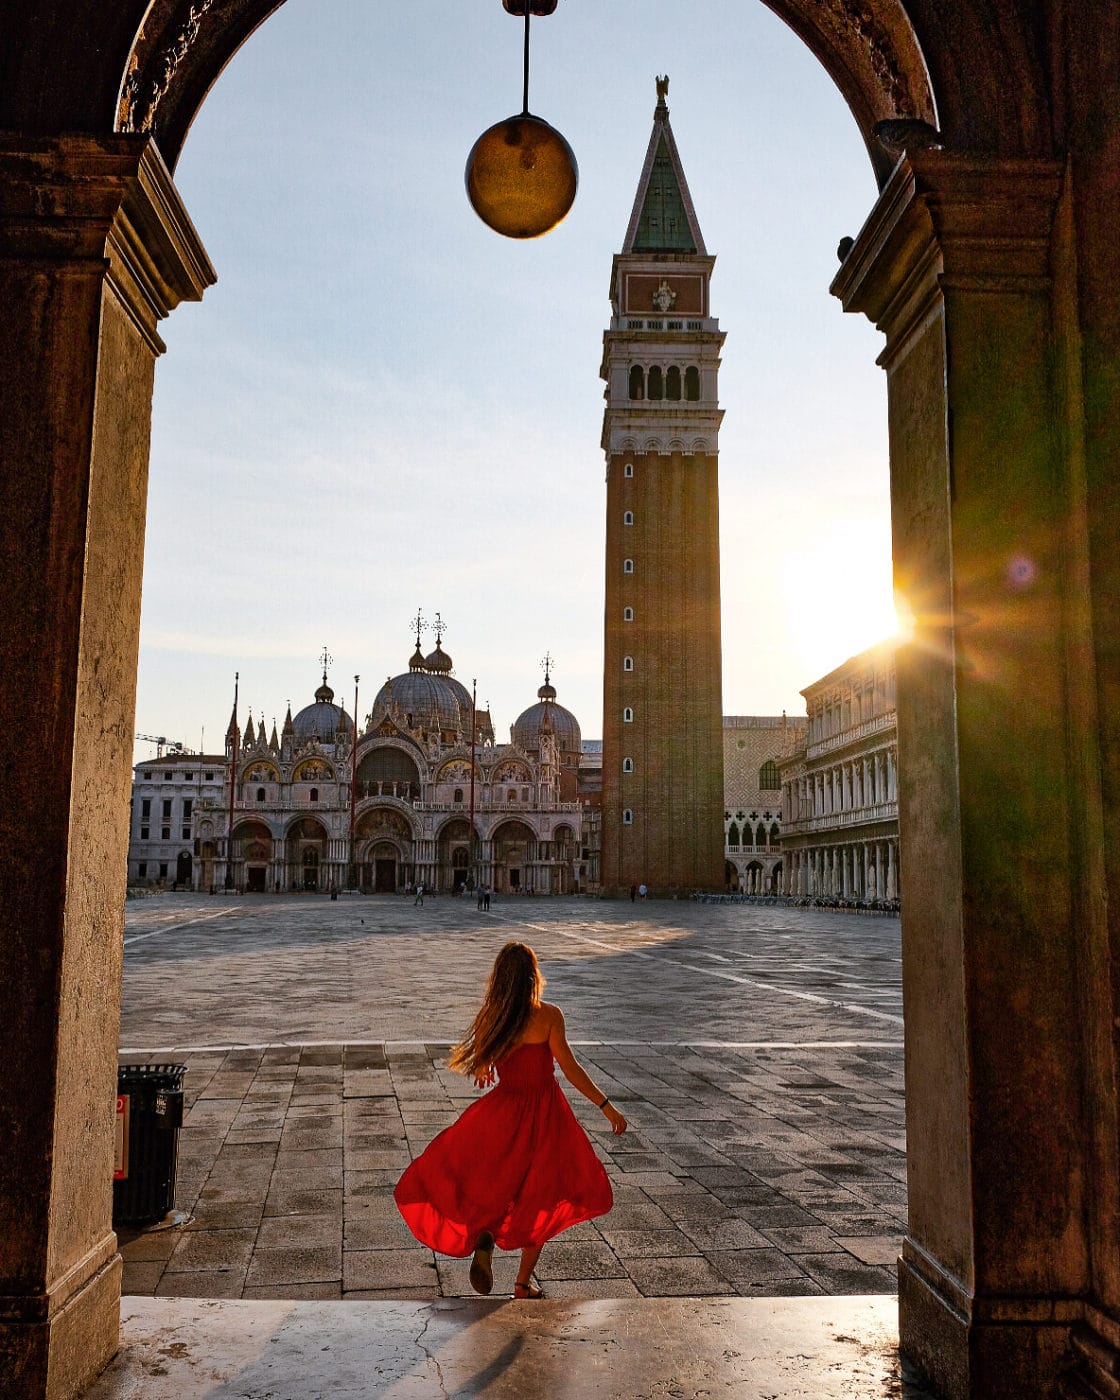 Girl in red dress twirling about in Saint Mark's Square, Venice Italy at sunrise